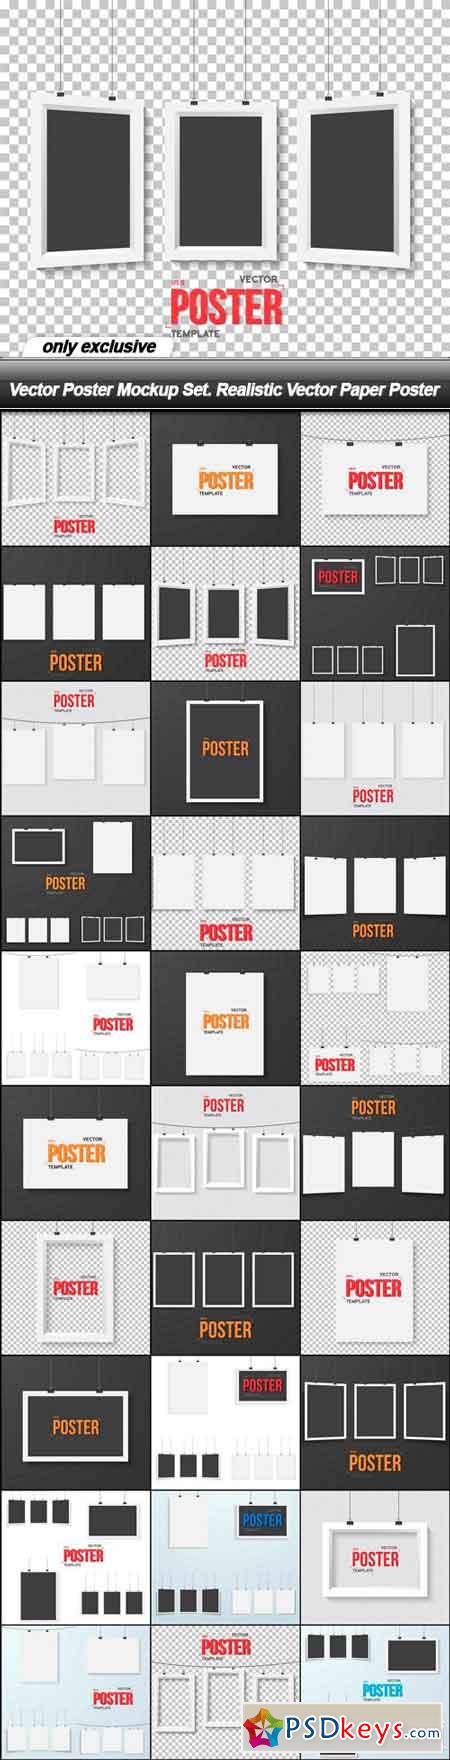 POSTER » page 35 » Free Download Photoshop Vector Stock image Via 